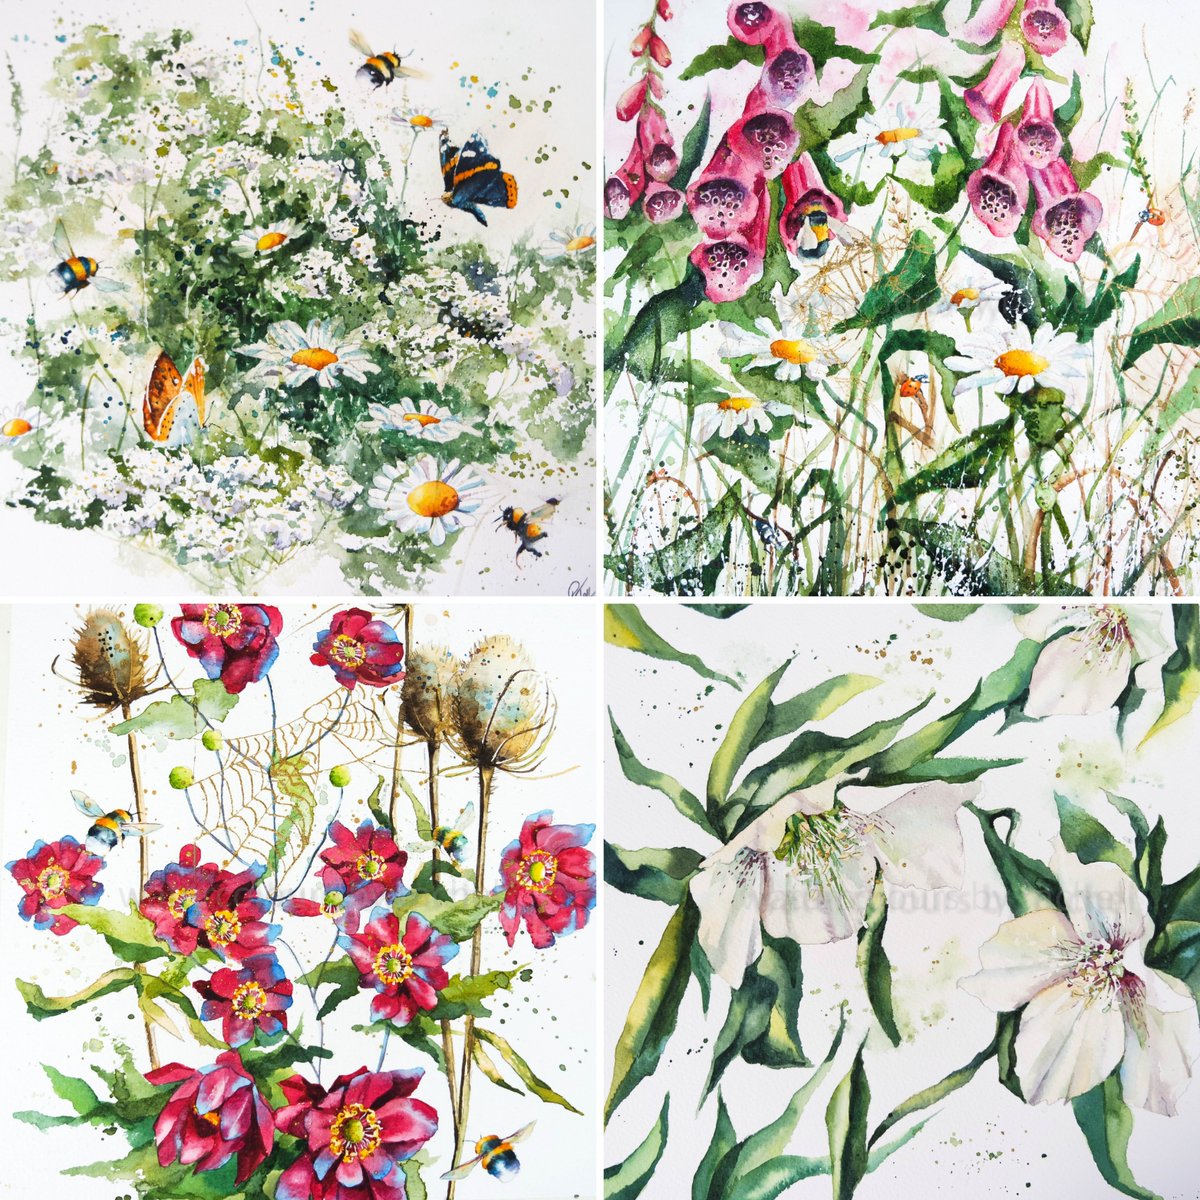 Good Morning , I have added two NEW originals to my website, larger pieces at 28cm x 28cm, both available or you can buy both together and save £20 ! Check out my website, available as prints and cards too! watercoloursbyrachel.co.uk #watercolour #art #buyart #paintings #originals